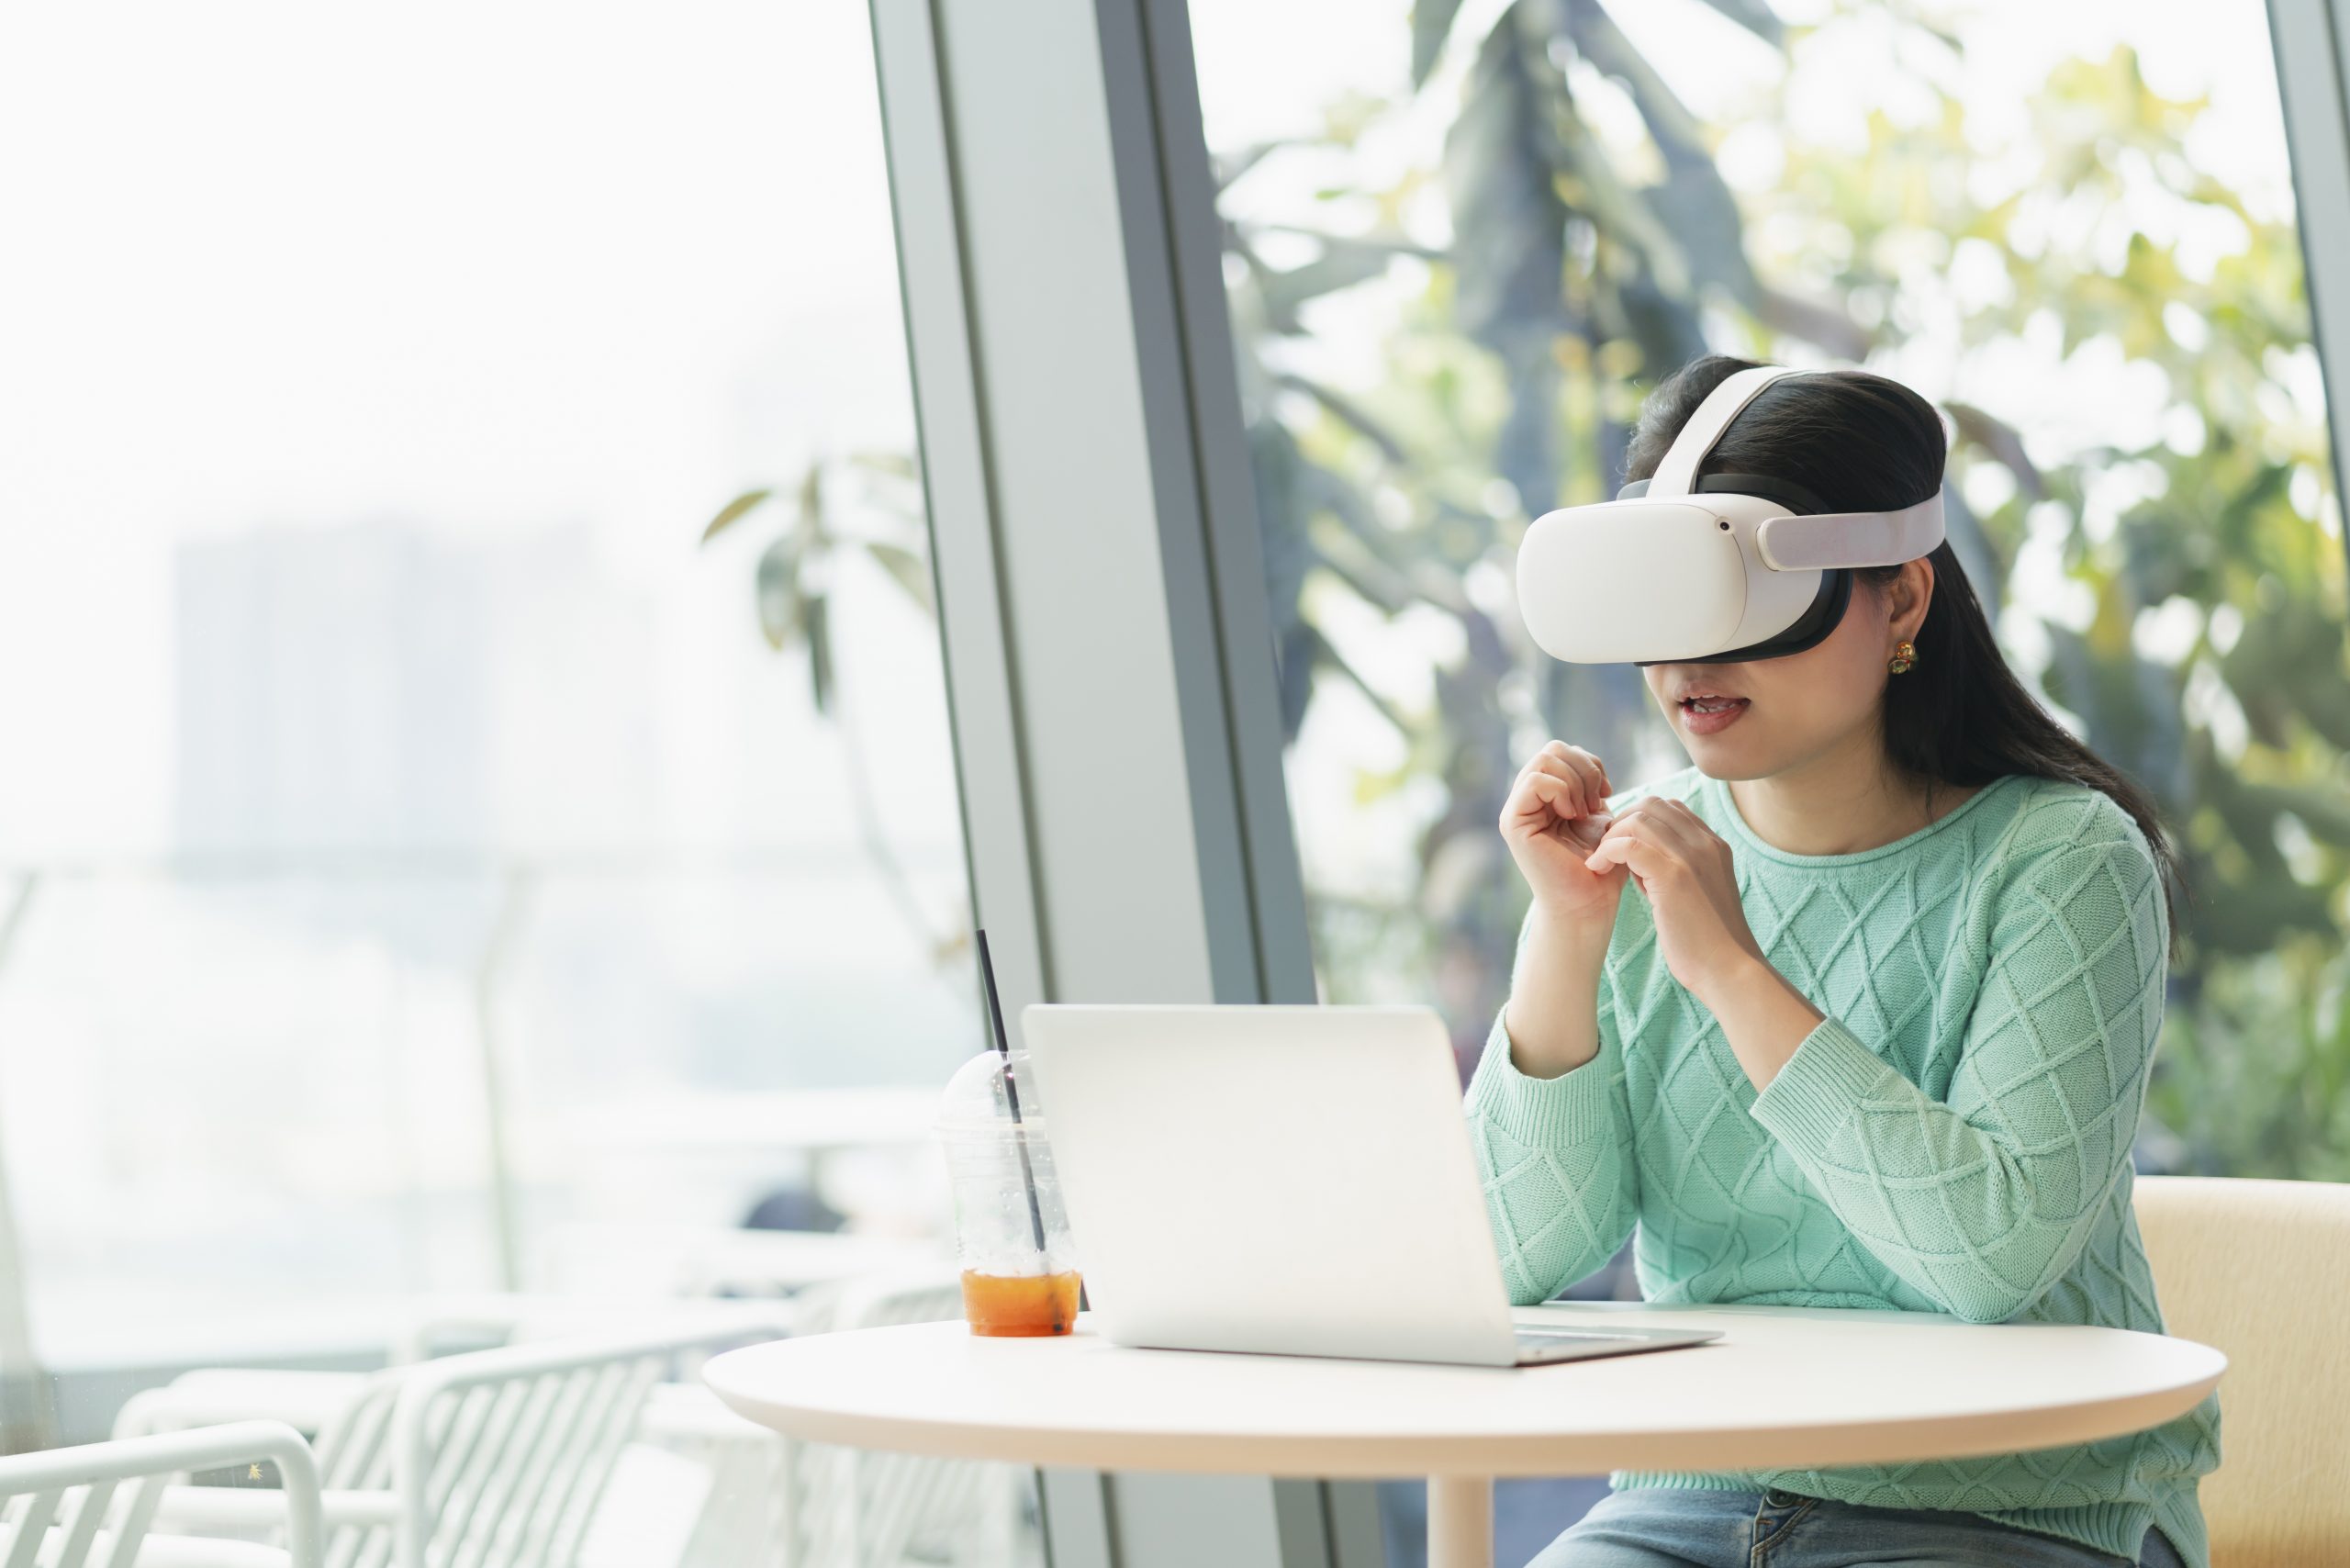 smart-attractive-asian-female-business-owner-weared-virtual-reality-glasses-enjoys-casual-metaverse-meeting-with-concentrate-at-cafe-restaurantasian-female-using-oculus-rift-headset-in-cafe-scaled.jpg